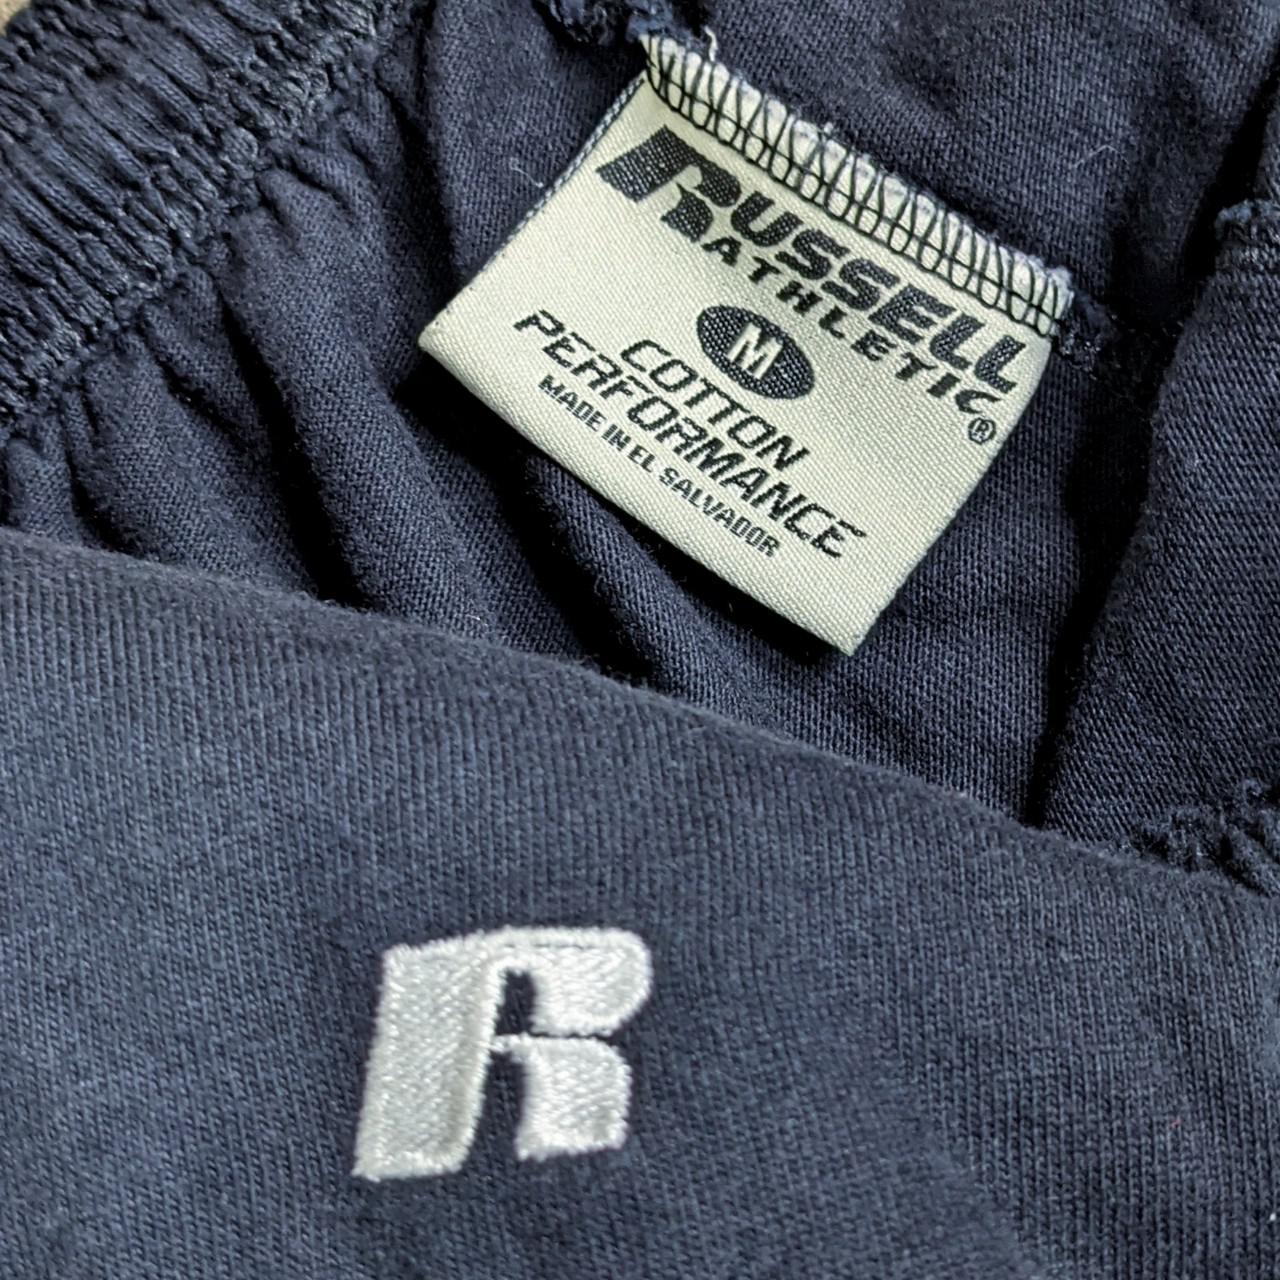 Product Image 3 - Vintage Russell Athletic sweatpants. Men's